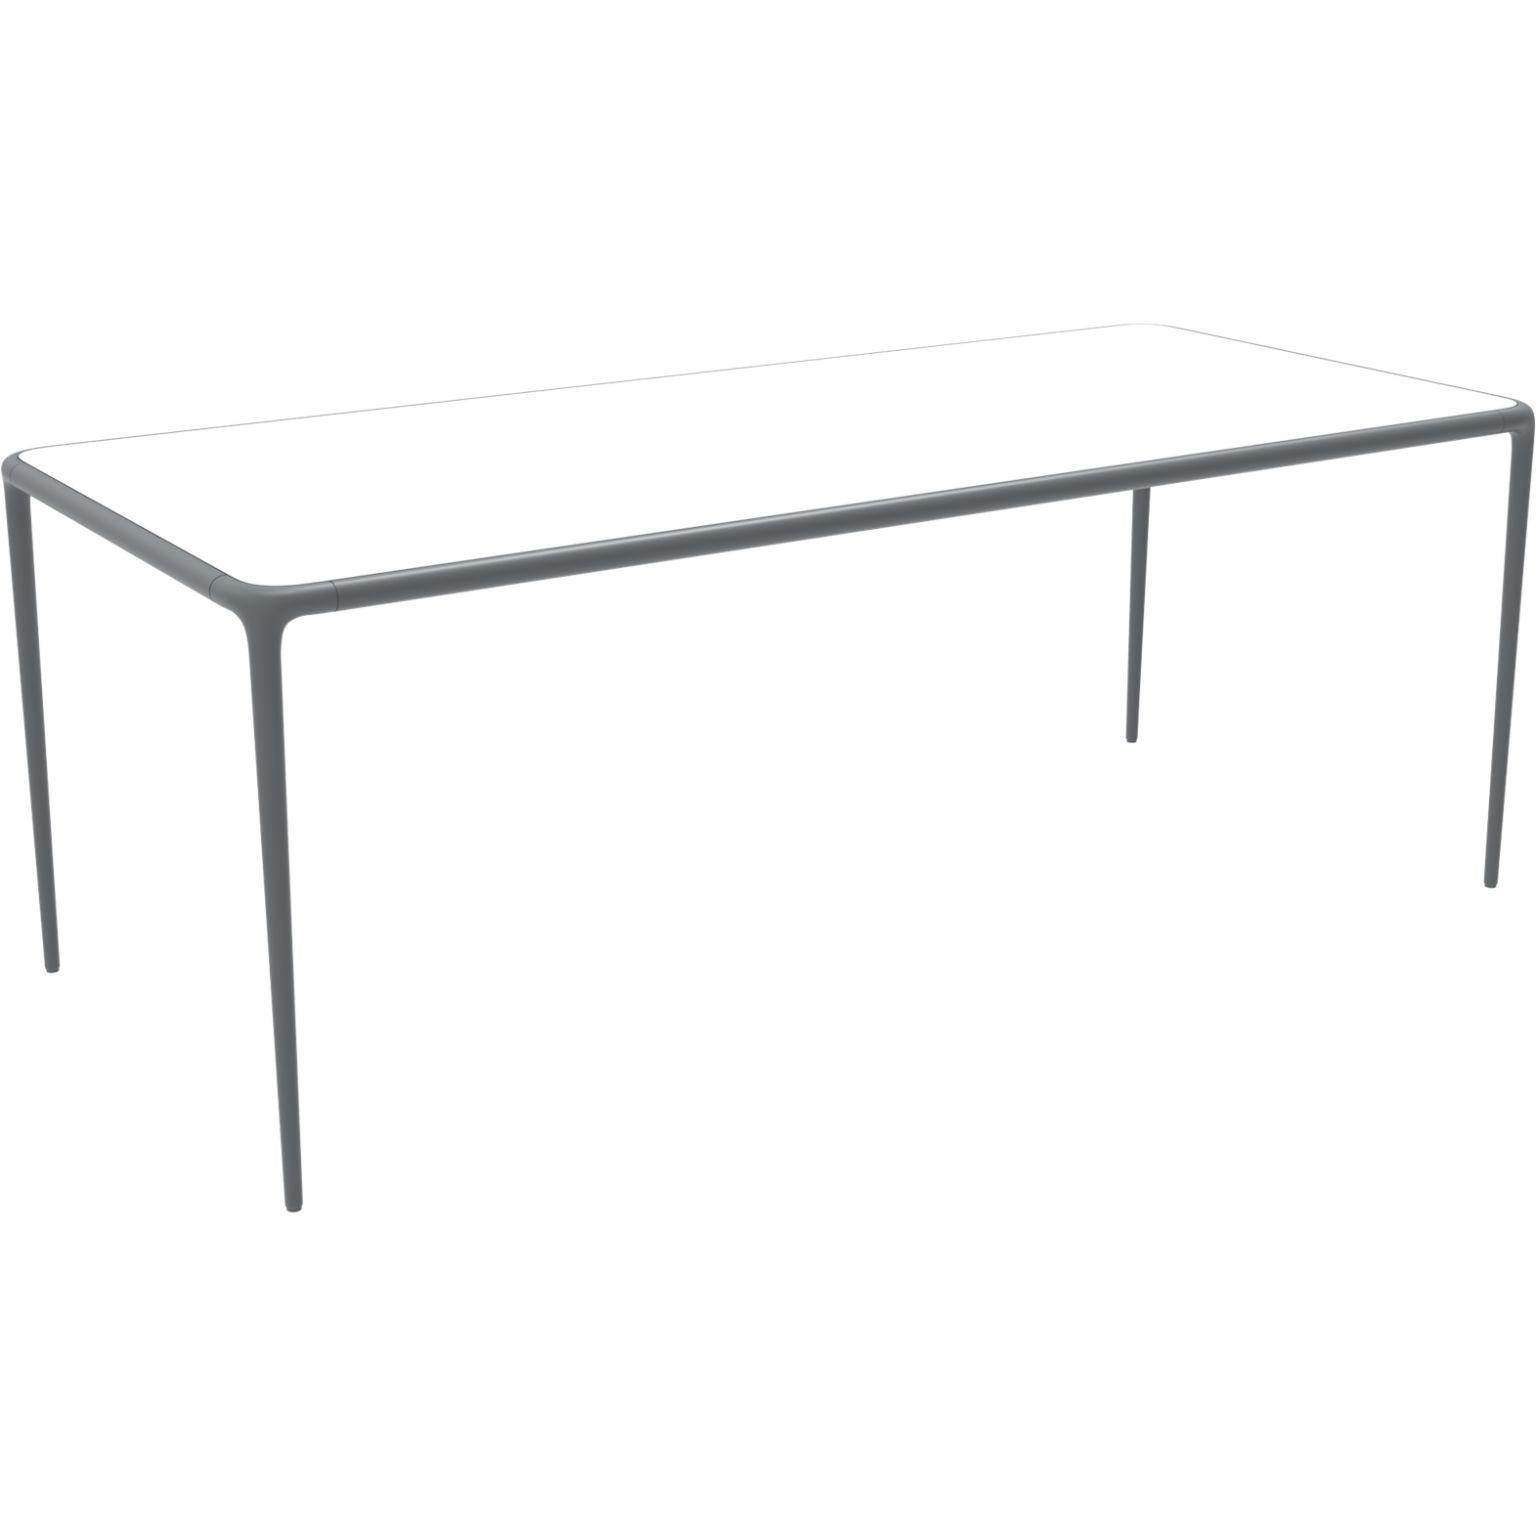 Xaloc grey glass top 200 table by Mowee
Dimensions: D 200 x W 90 x H 74 cm
Material: Aluminum, tinted tempered glass top.
Also available in different aluminum colors and finishes (HPL Black Edge or Neolith).

Xaloc synthesizes the lines of